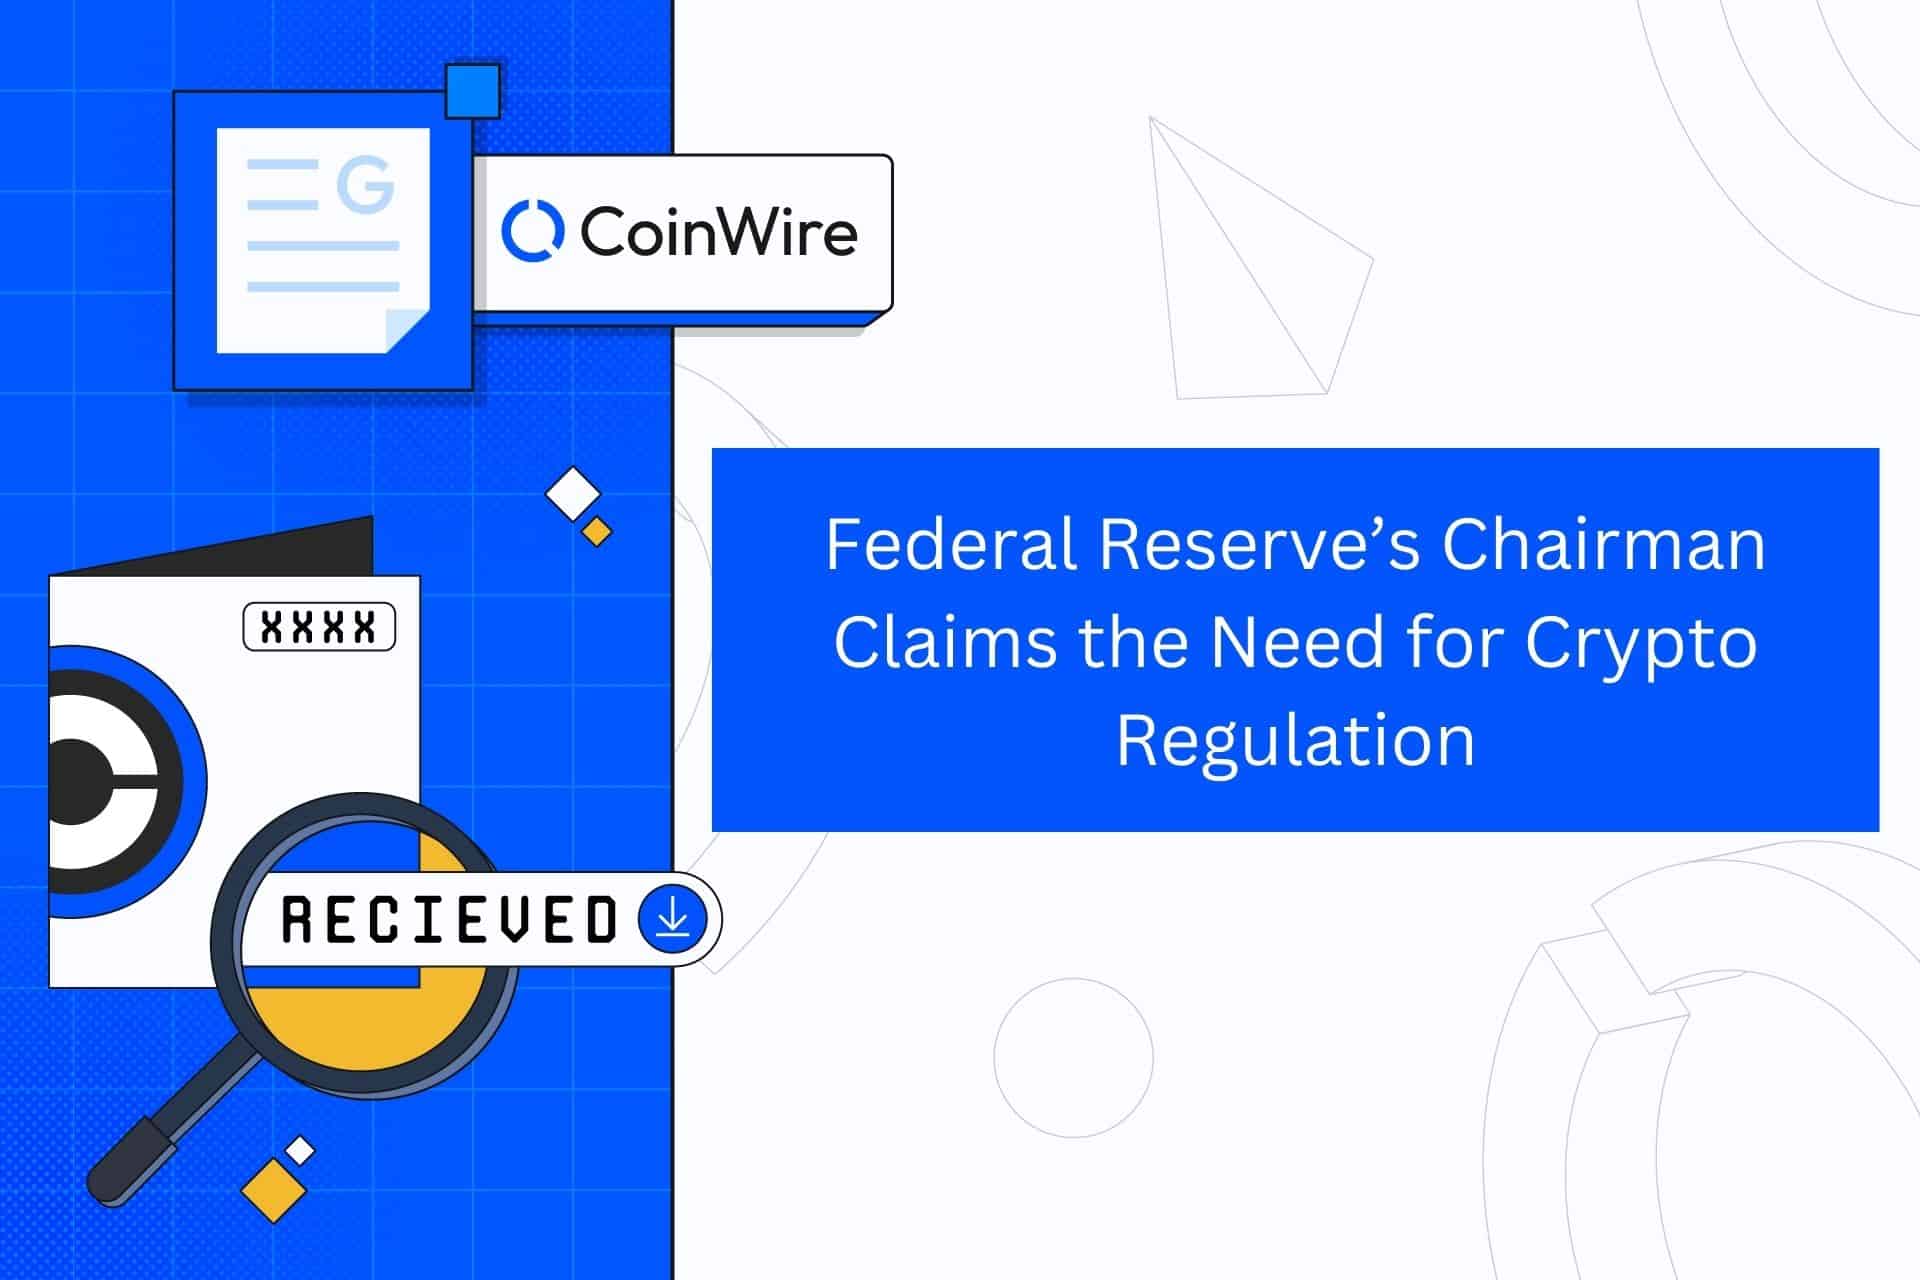 Federal Reserve’s Chairman Claims The Need For Crypto Regulation